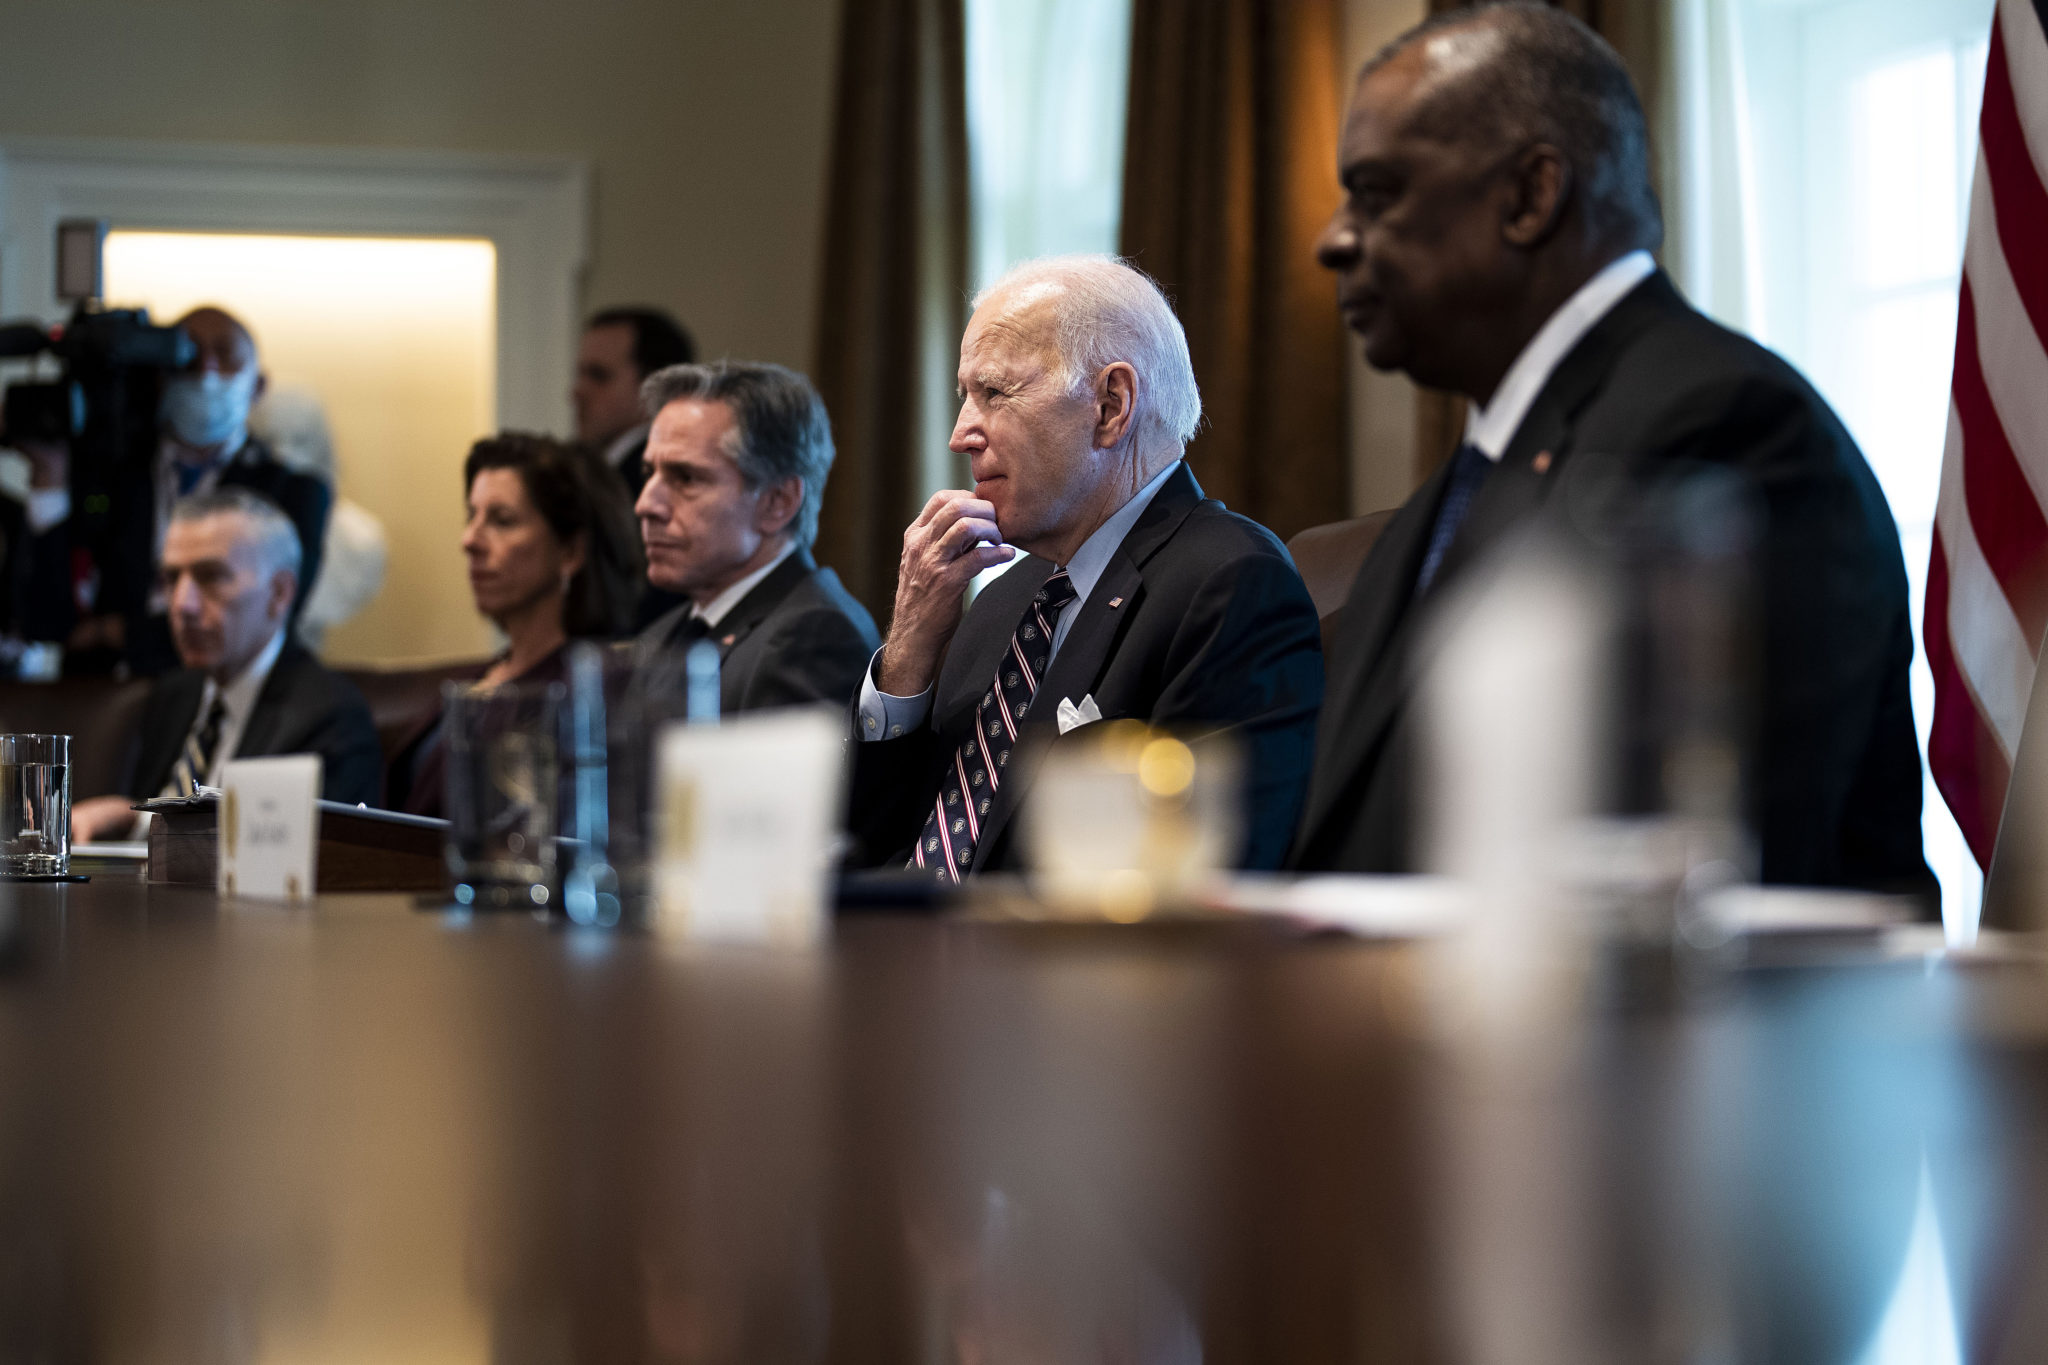 President Biden Meets With Colombian President Duque At The White House